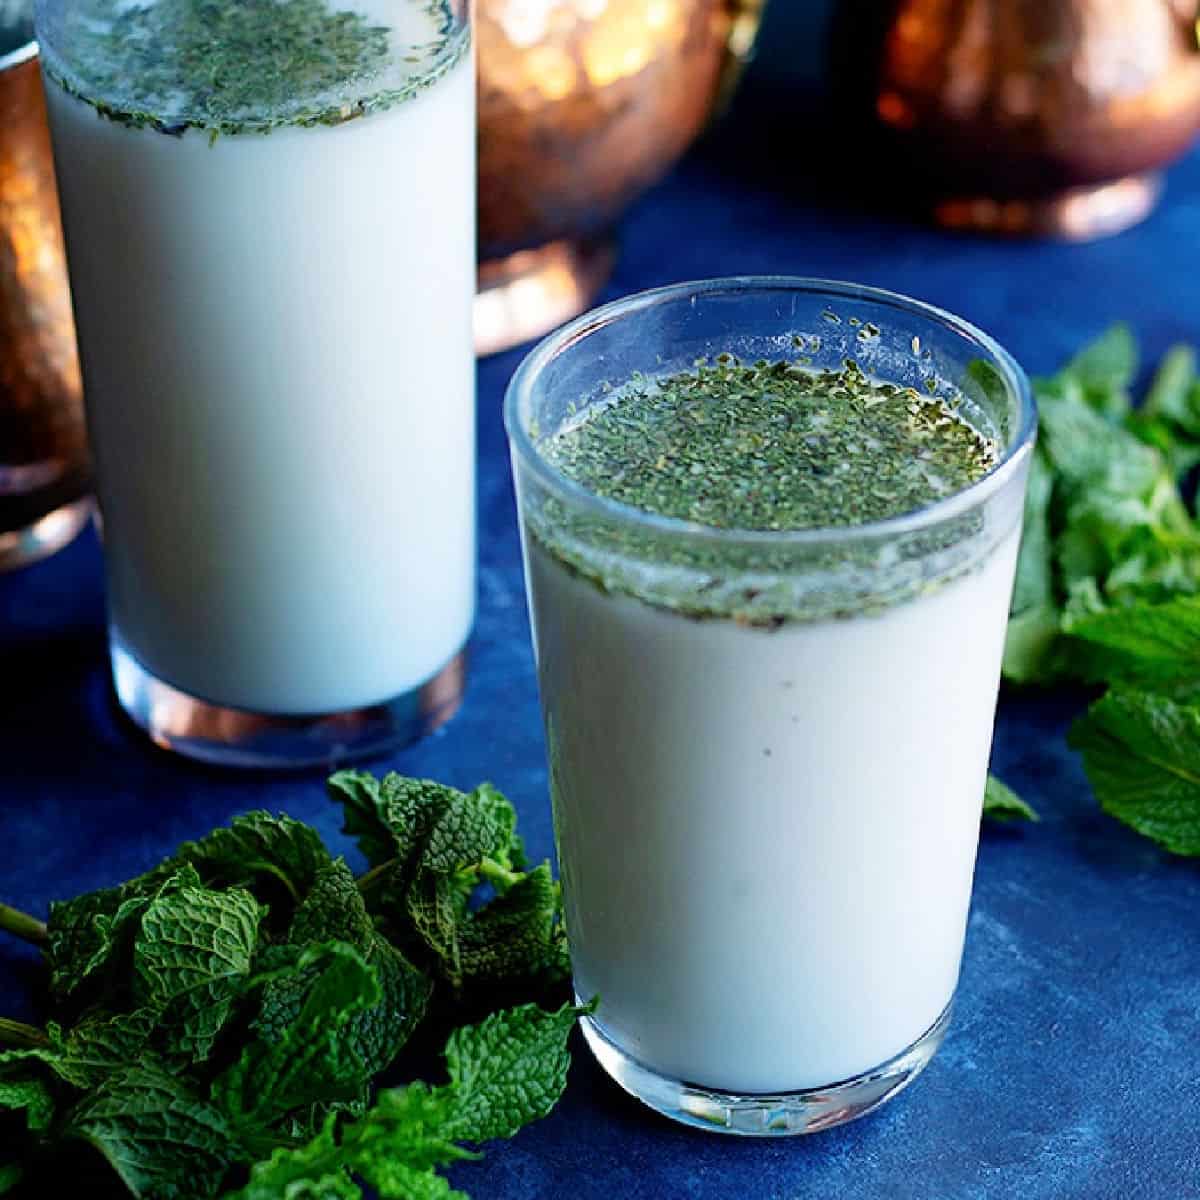 Ayran or doogh is a savory yogurt drink that's made with only three ingredients. This refreshing drink is served with main dishes and is great for hydration. 
